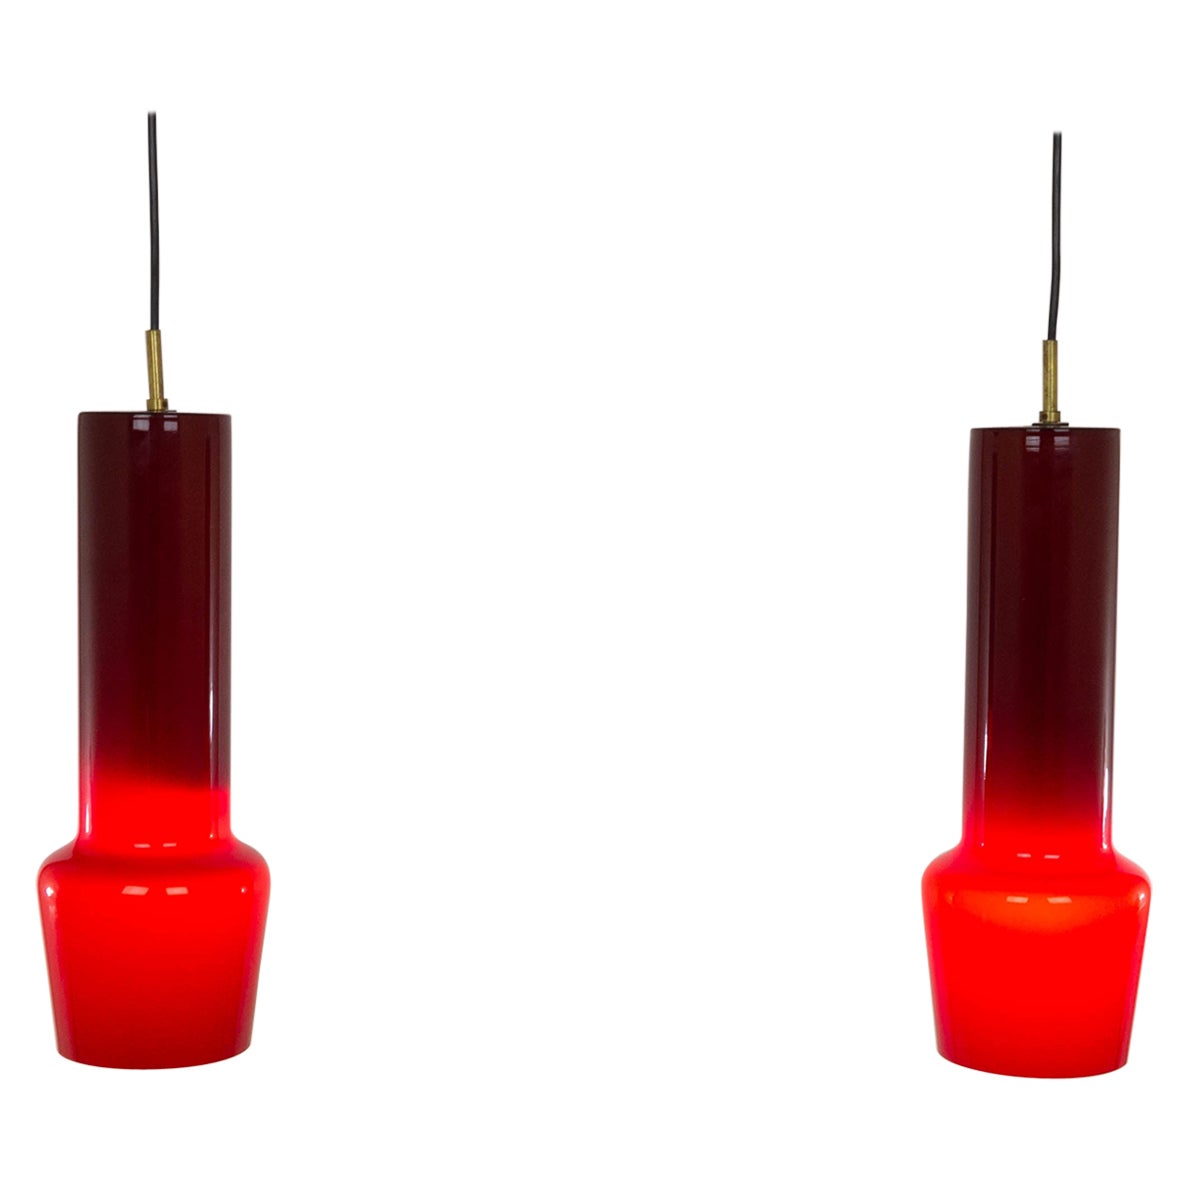 Pair of red glass pendants by Massimo Vignelli for Venini, 1950s